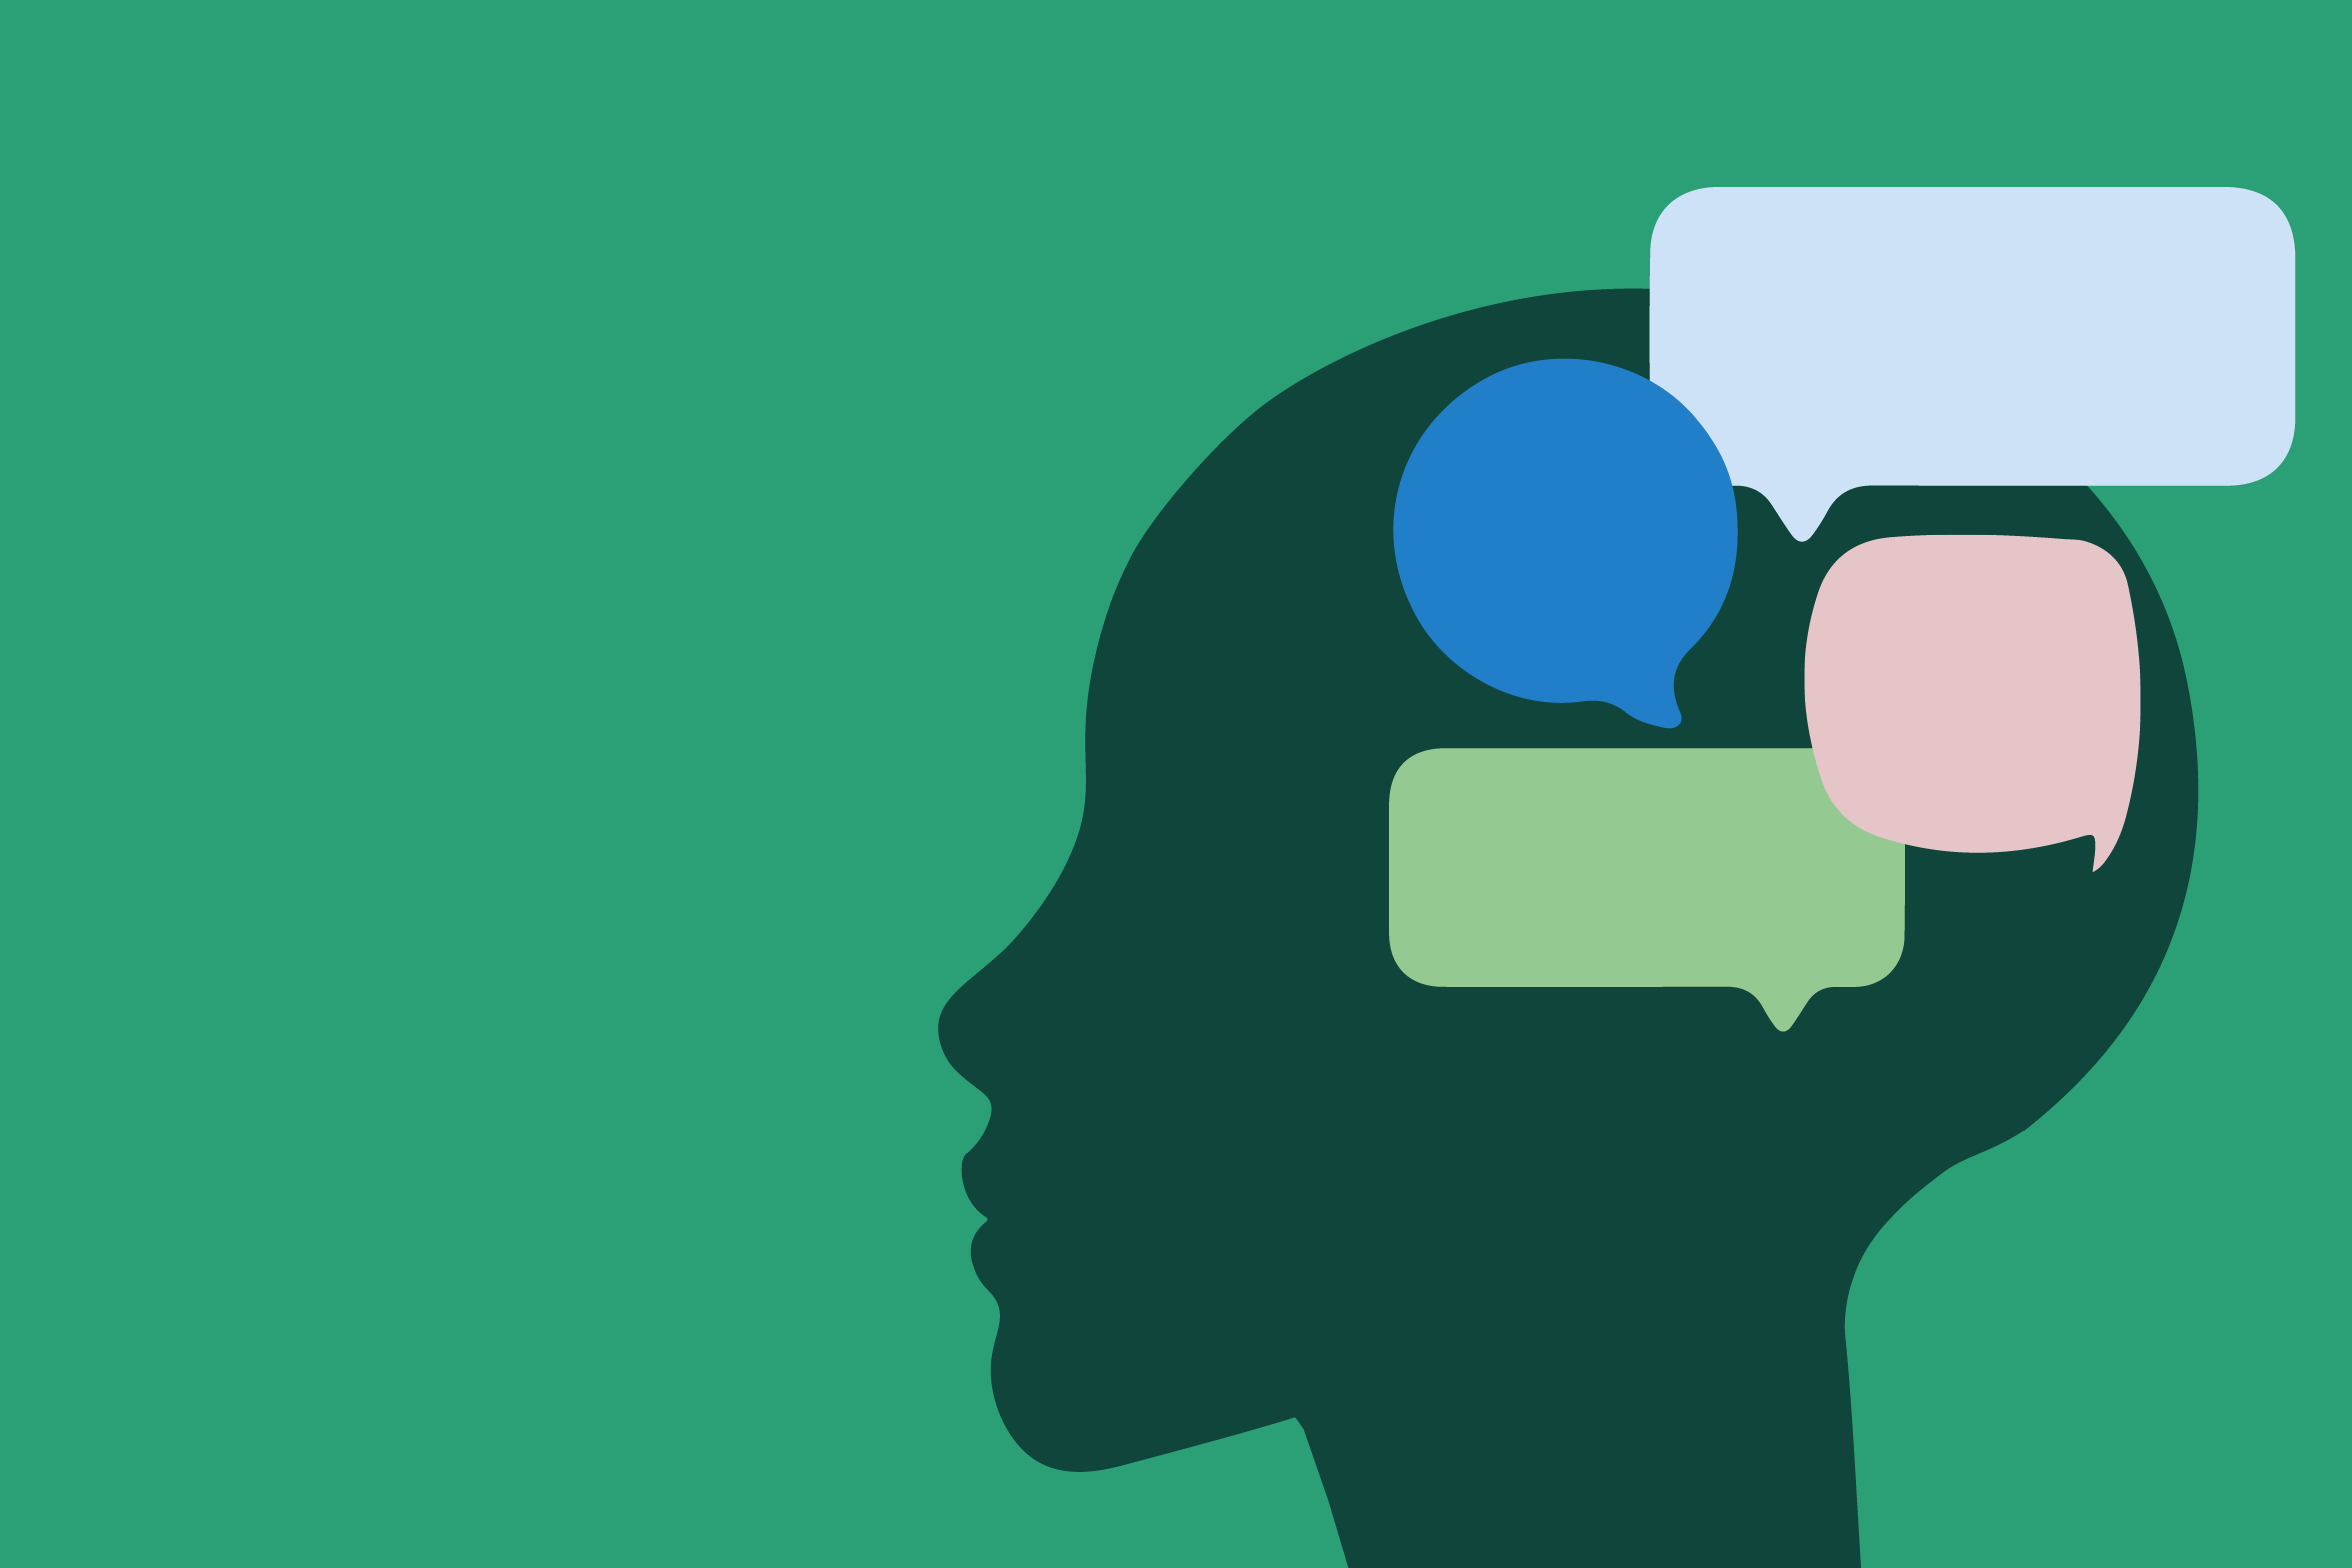 An illustration of a person's head with speech bubbles, indicating communication or thoughts on a green background.